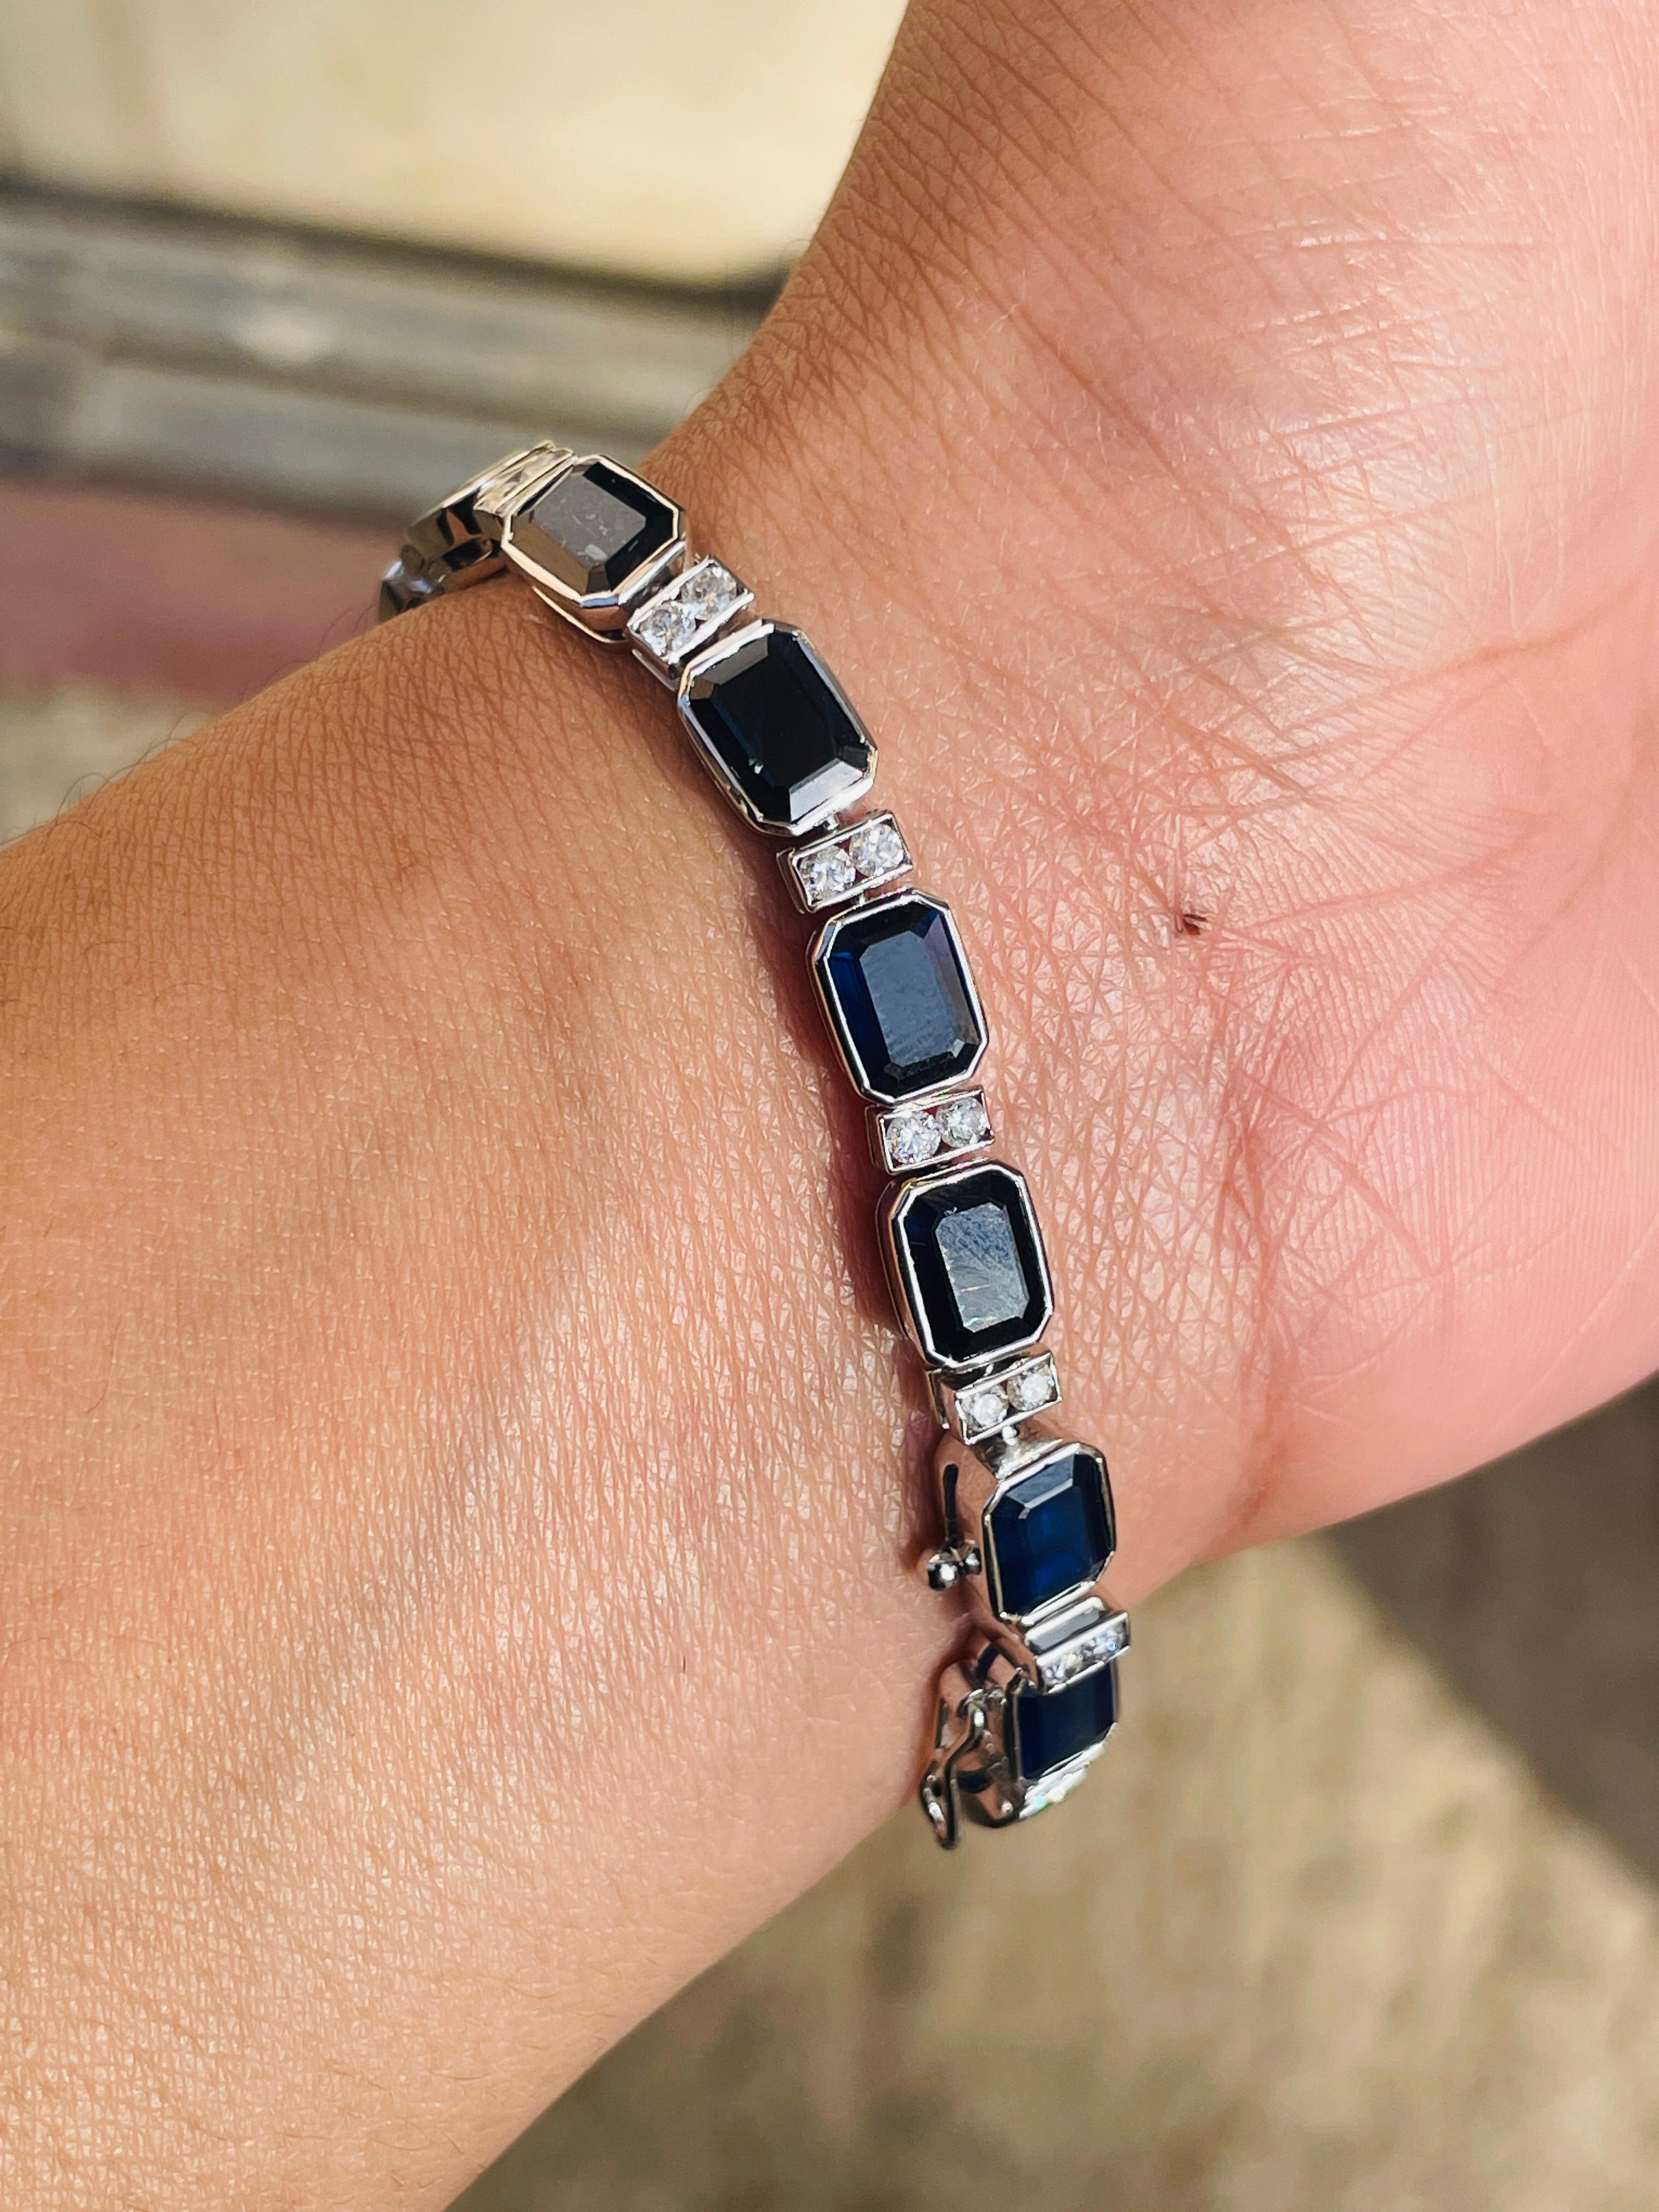 Blue Sapphire and Diamond bracelet in 18K Gold. It has a perfect octagon cut gemstone to make you stand out on any occasion or an event.
A tennis bracelet is an essential piece of jewelry when it comes to your wedding day. The sleek and elegant